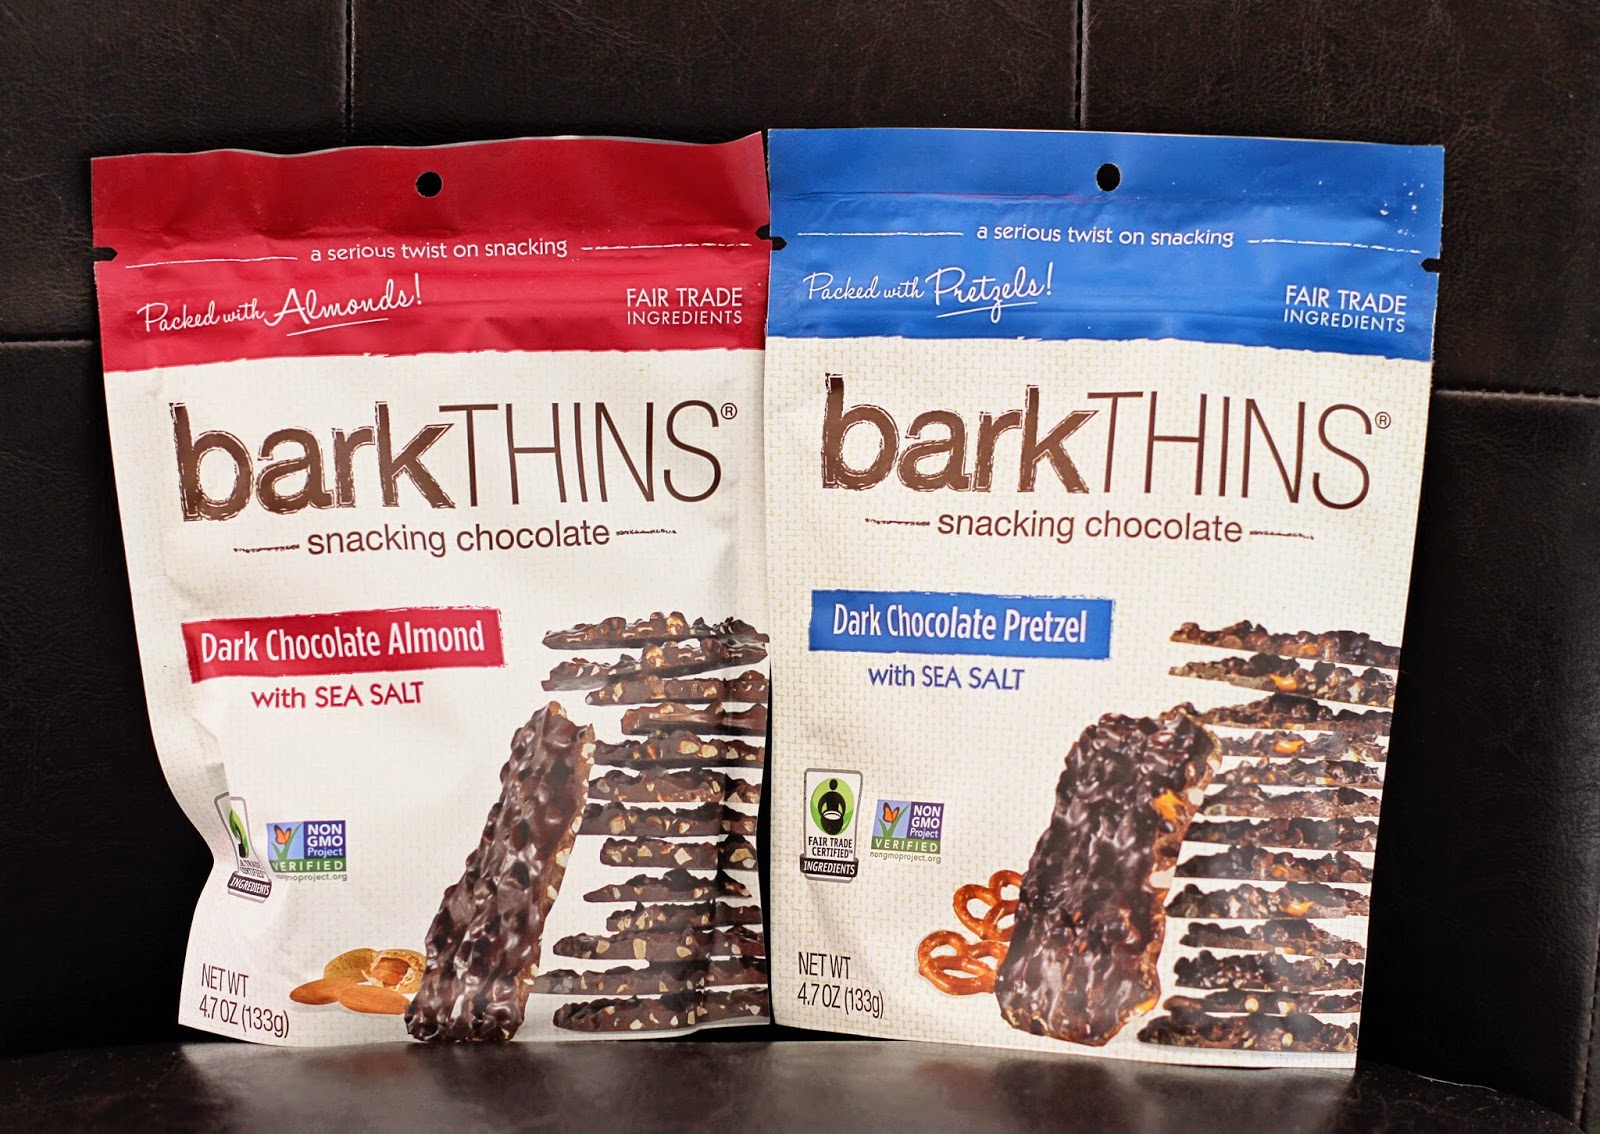 Chocolate Review: barkTHINS Dark Chocolate Coconut with Almonds